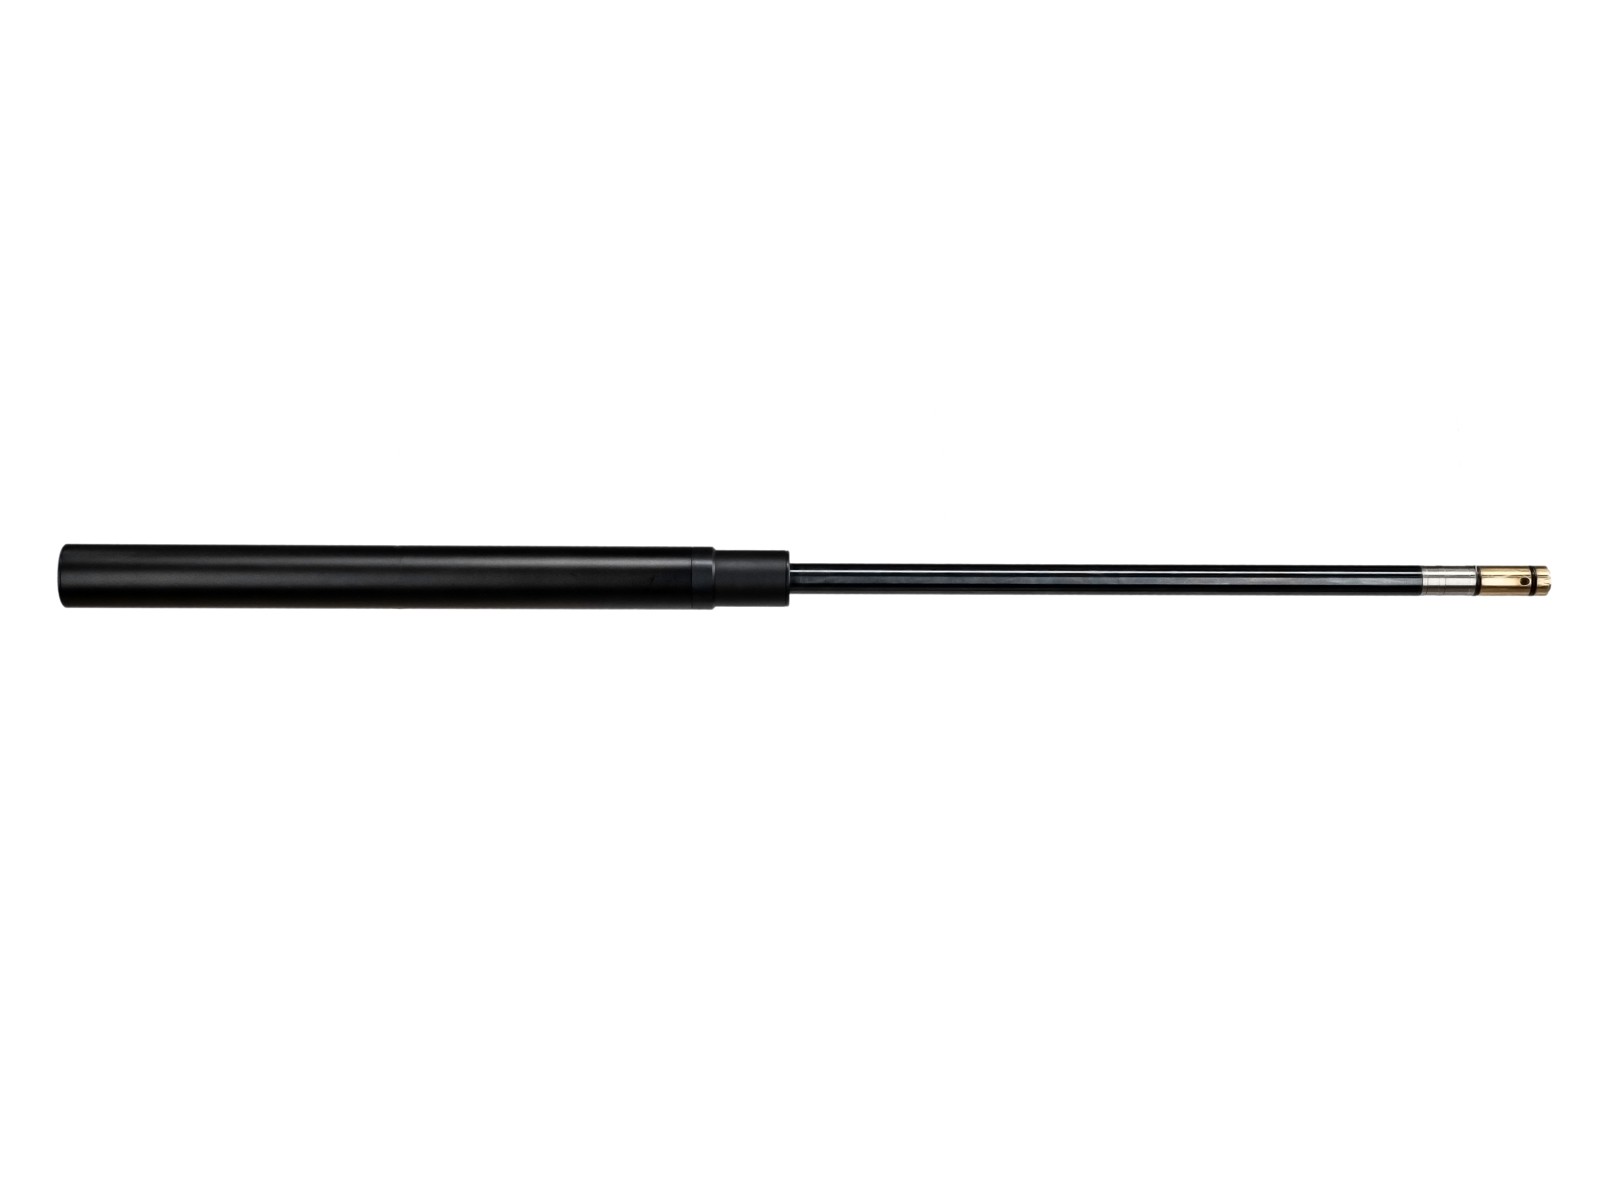 FX Impact STX Caliber-Change Kit, 500mm Barrel with Fixed Shroud and Moderator, .177 Cal